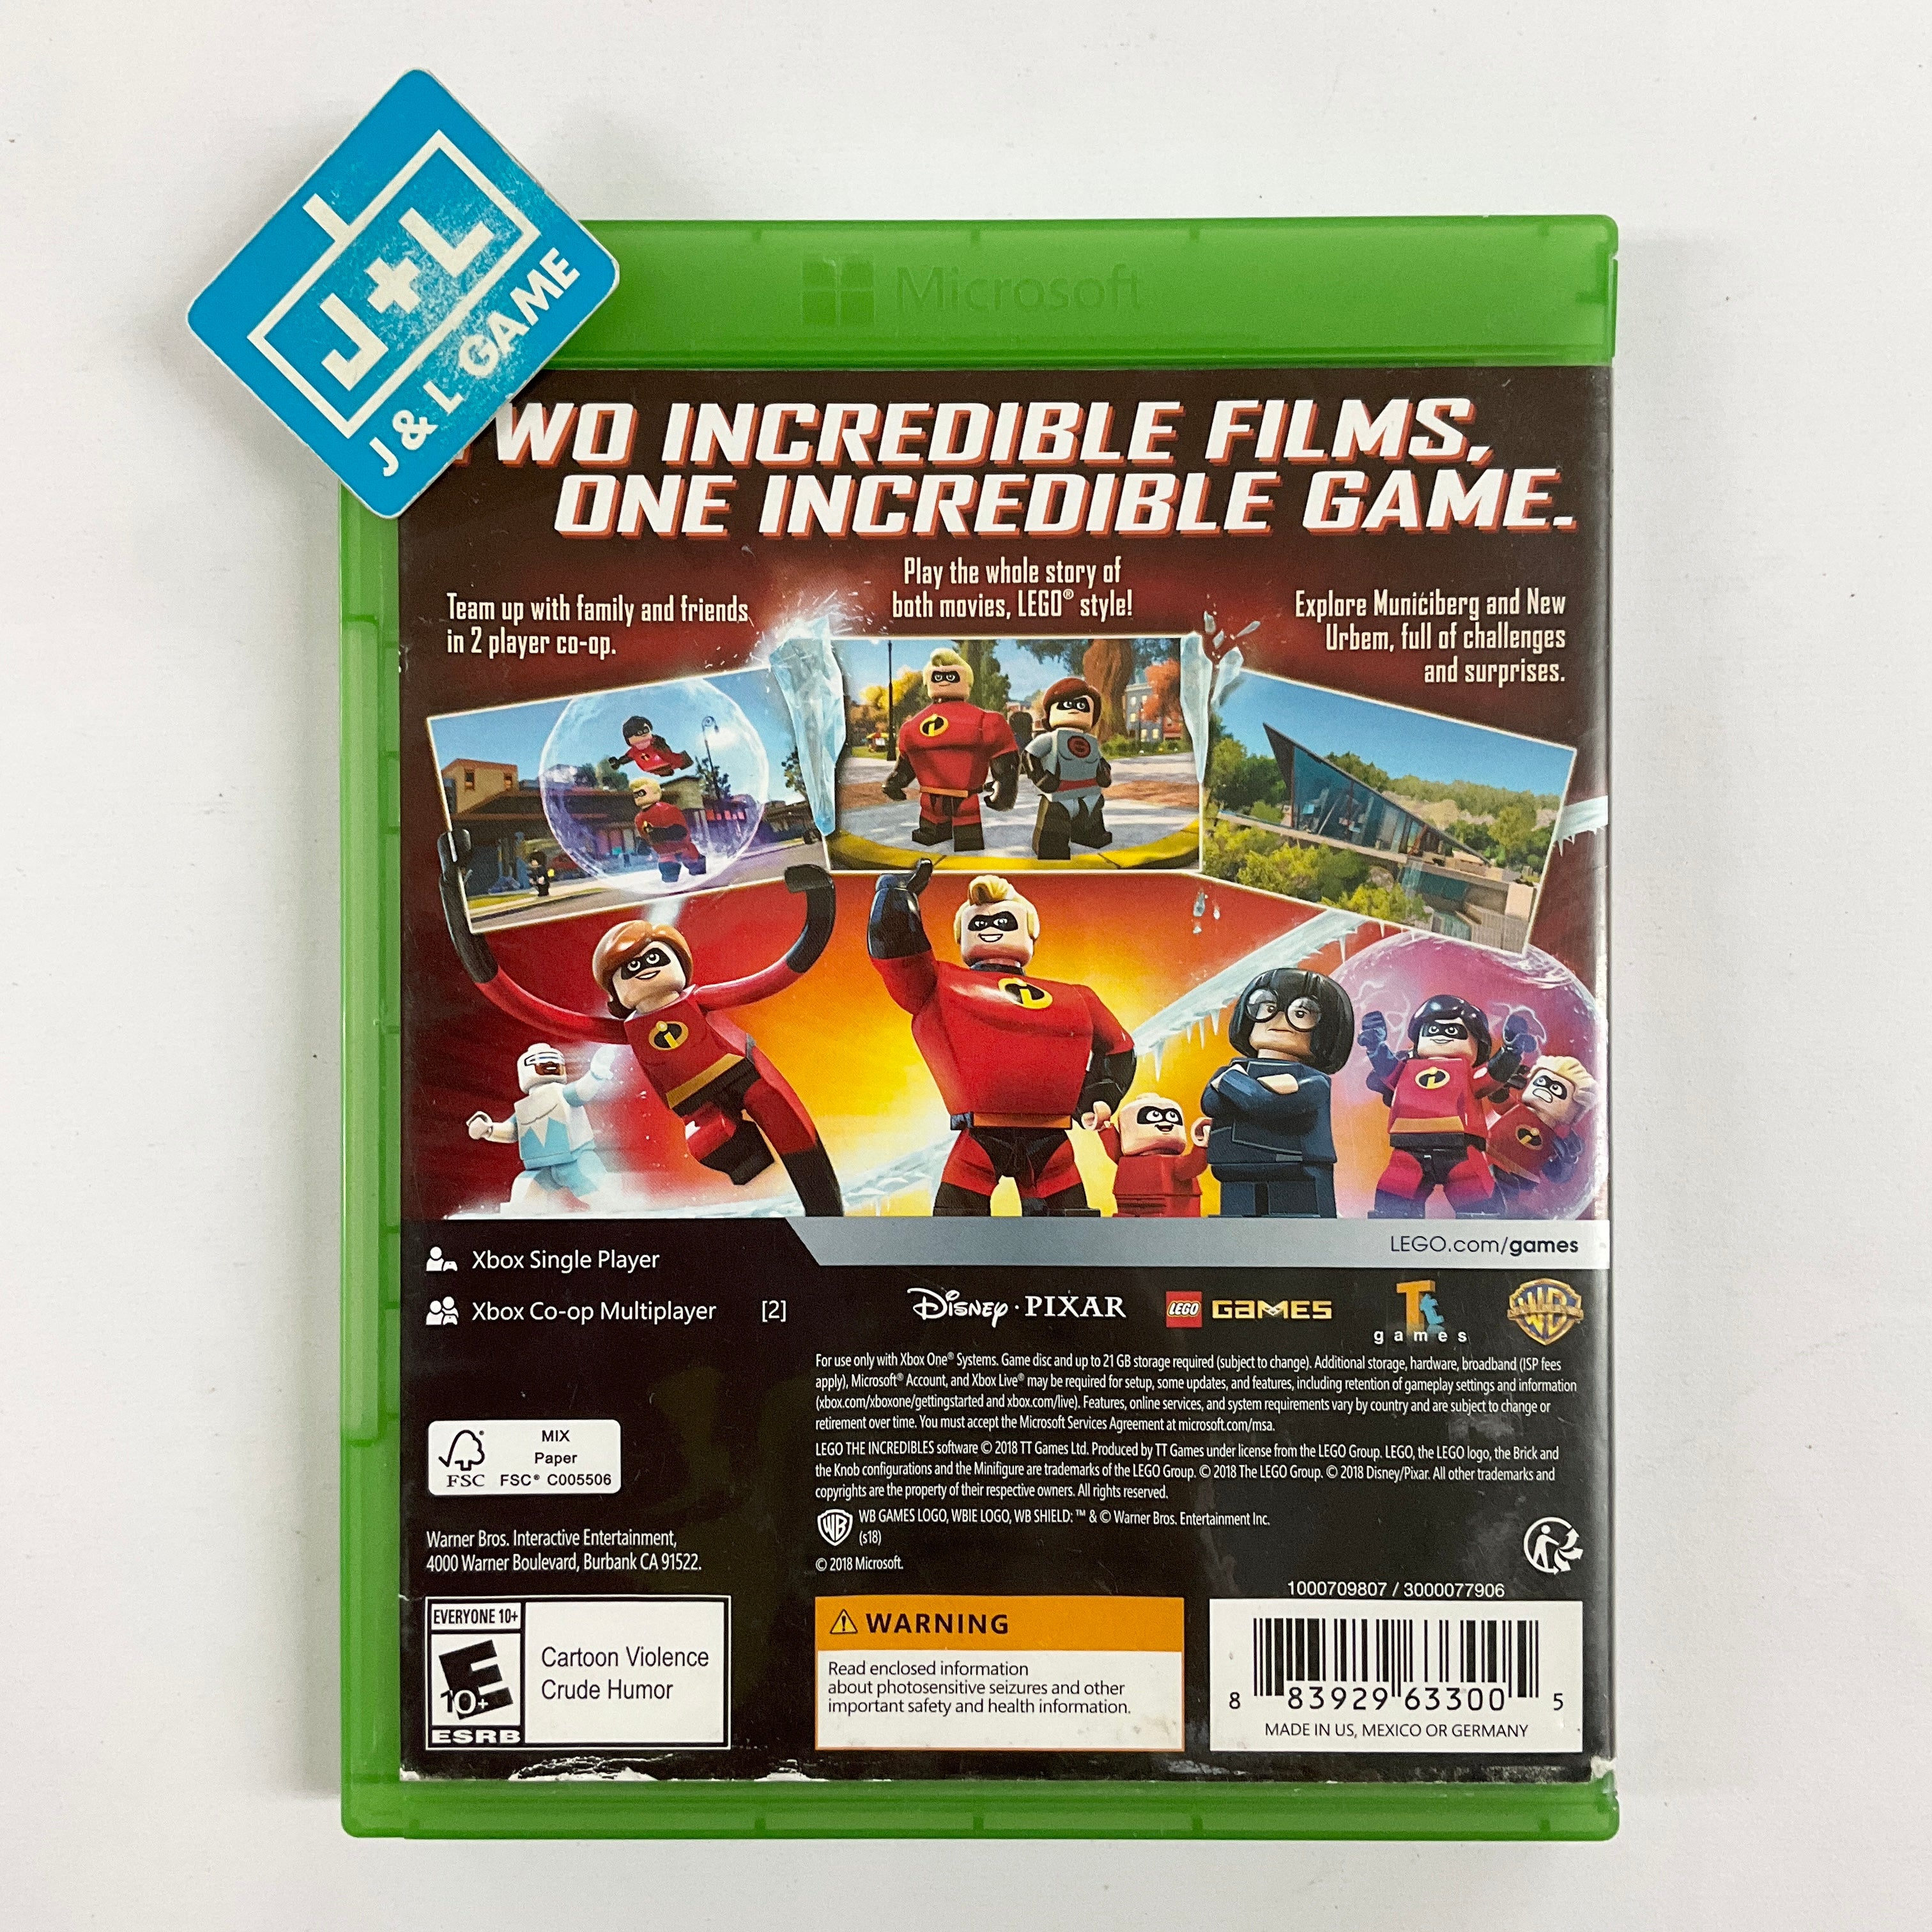 LEGO Disney Pixar's The Incredibles - (XB1) Xbox One [Pre-Owned] Video Games WB Games   